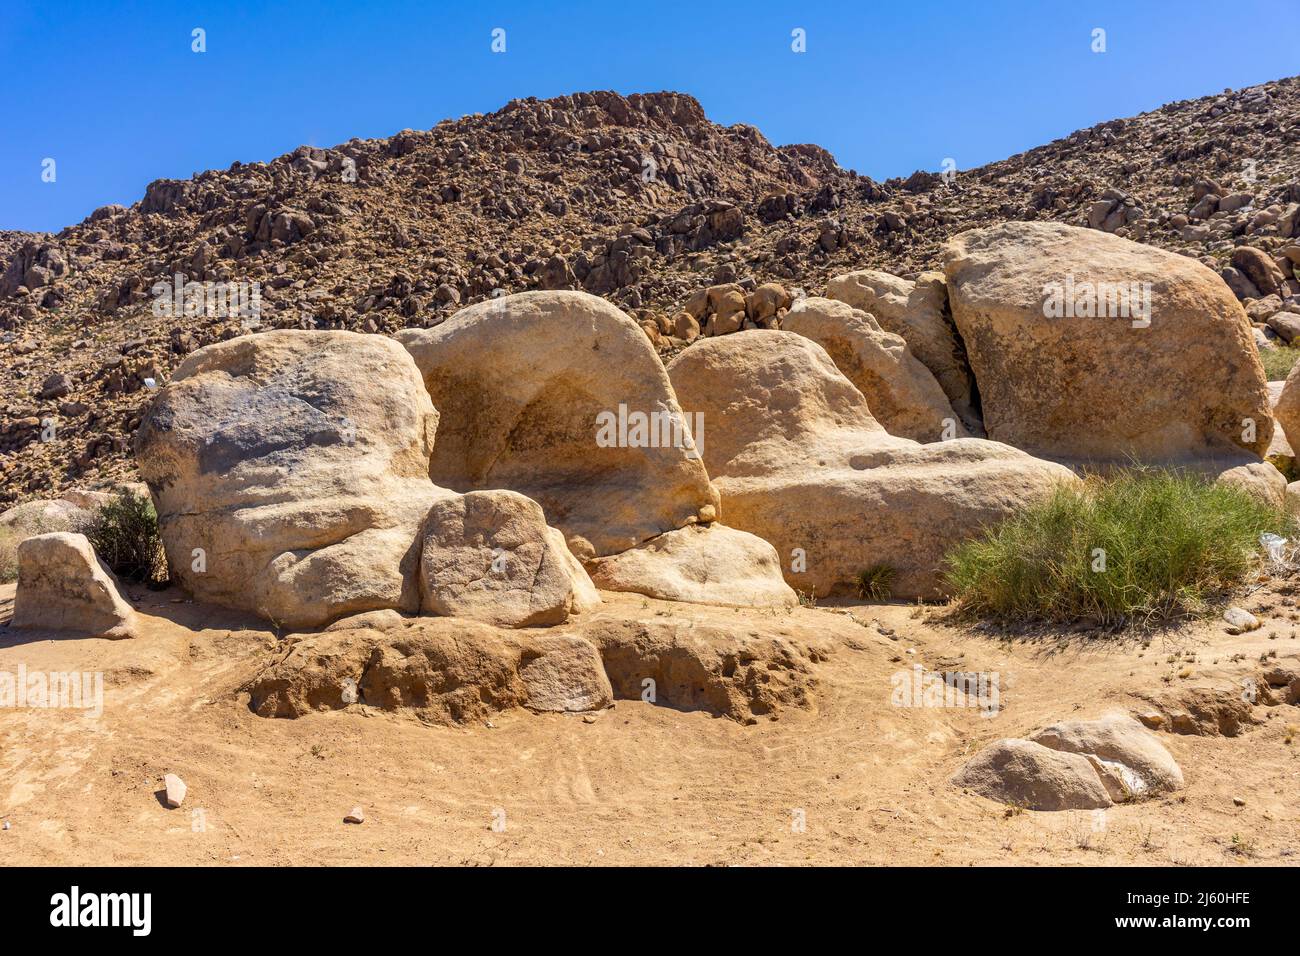 Group of large boulders on a hill in the Mojave Desert in California Stock Photo